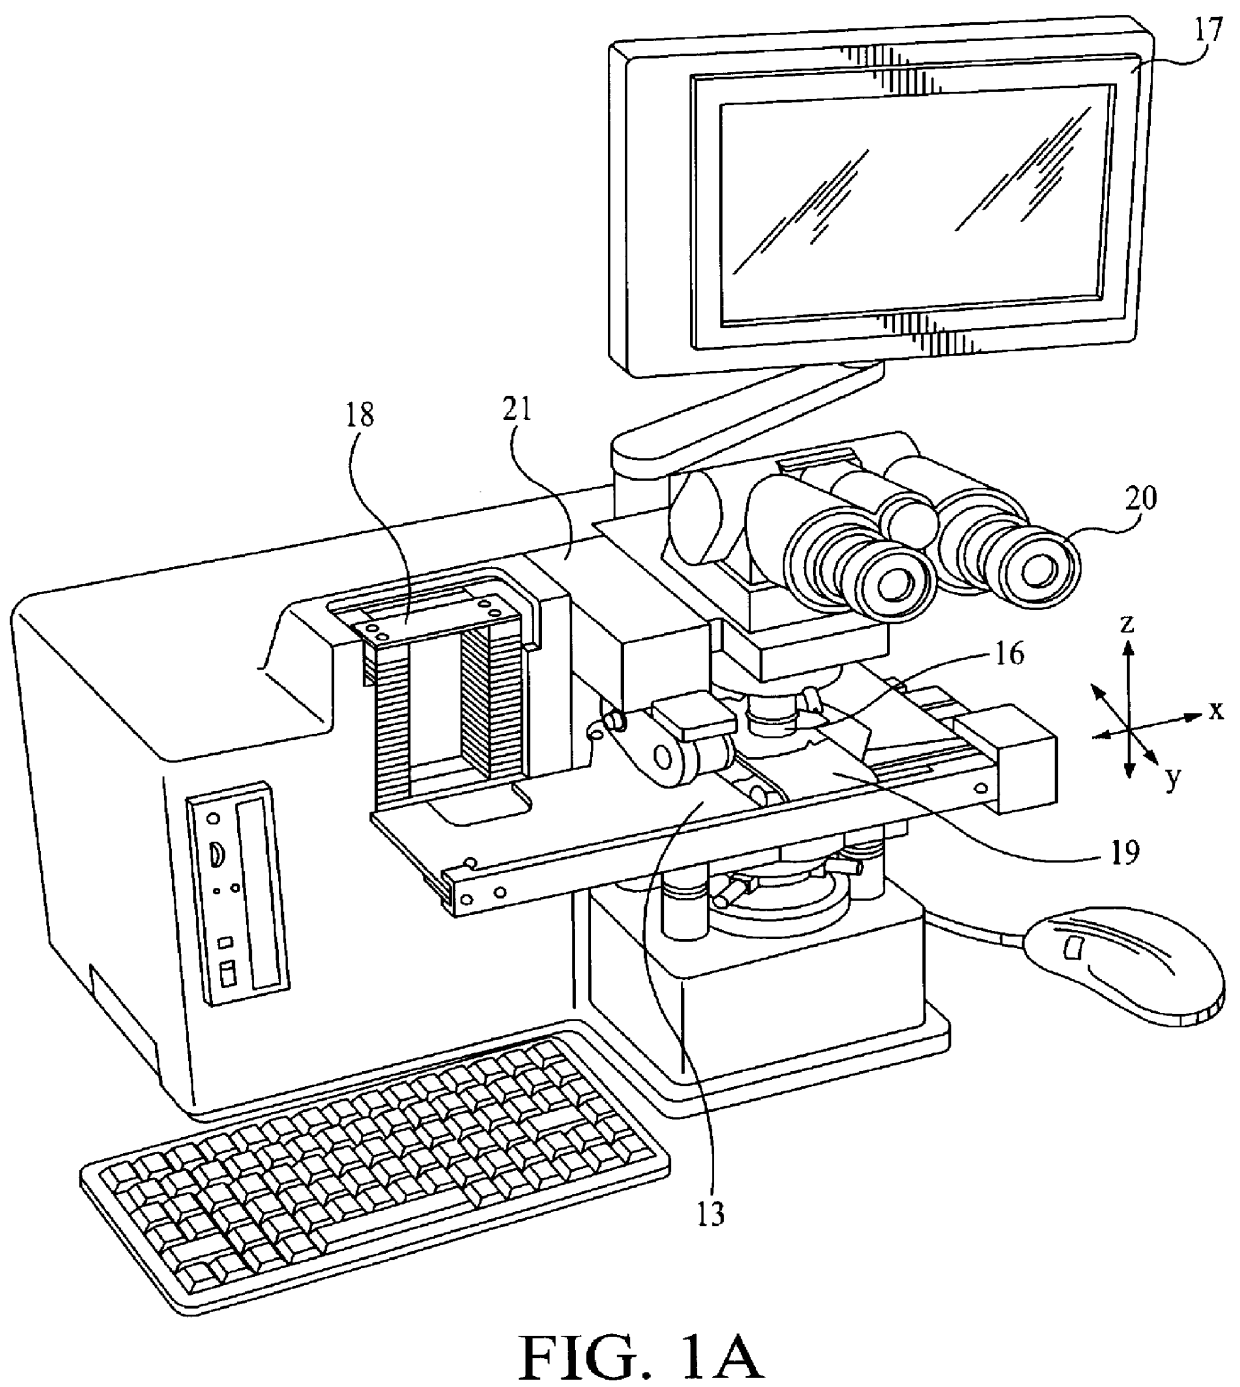 High-precision computer-aided microscope system